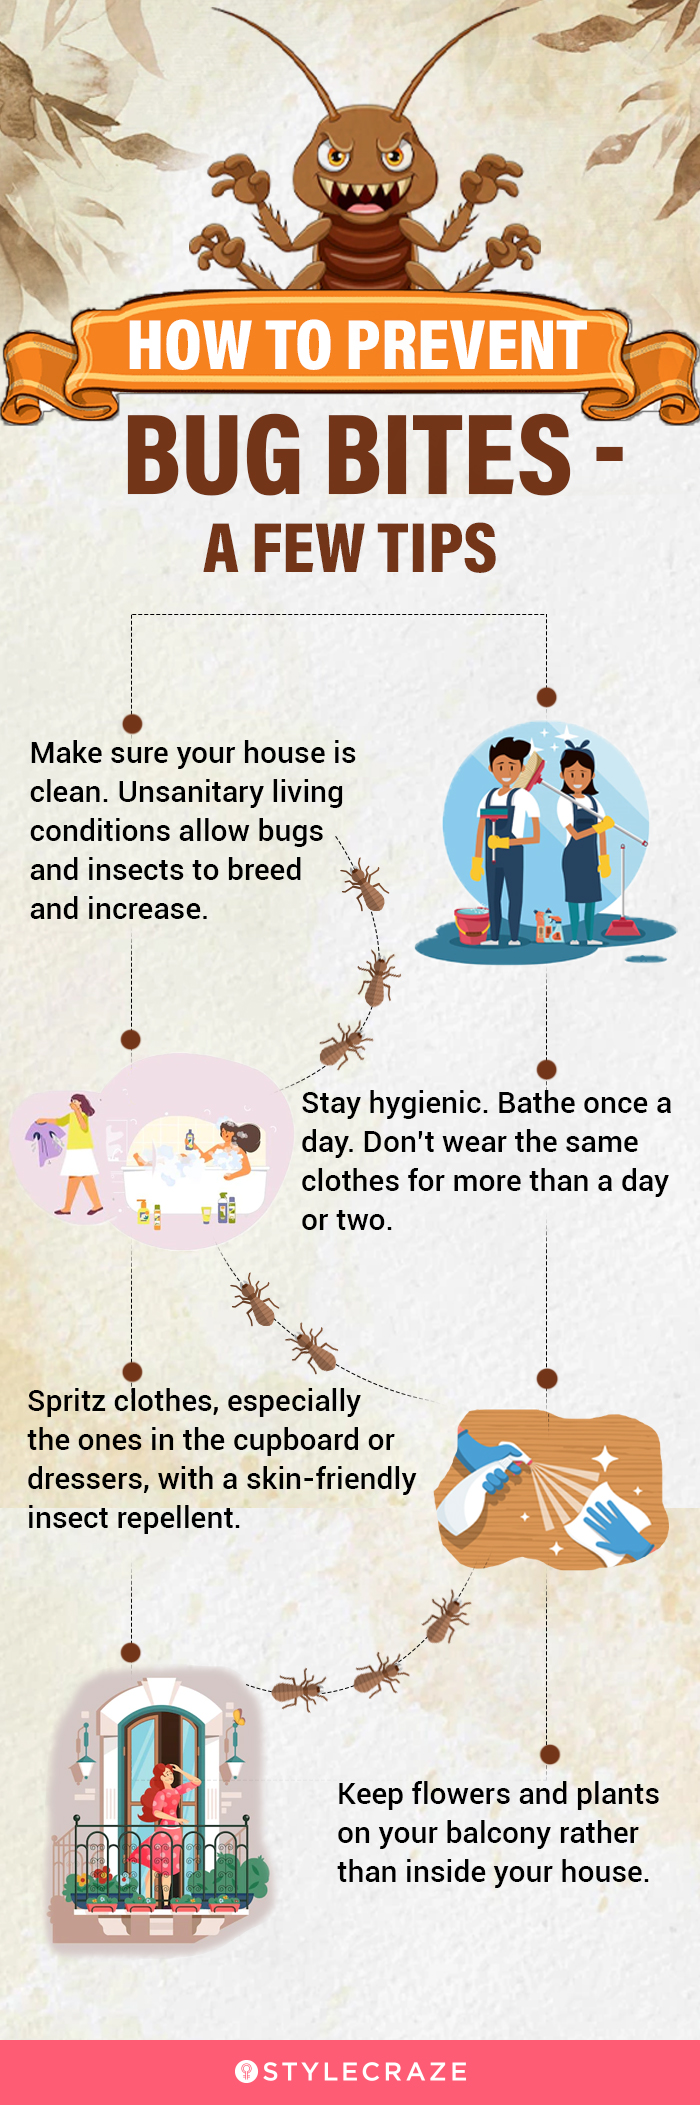 how to prevent bug bites a few tips [infographic]